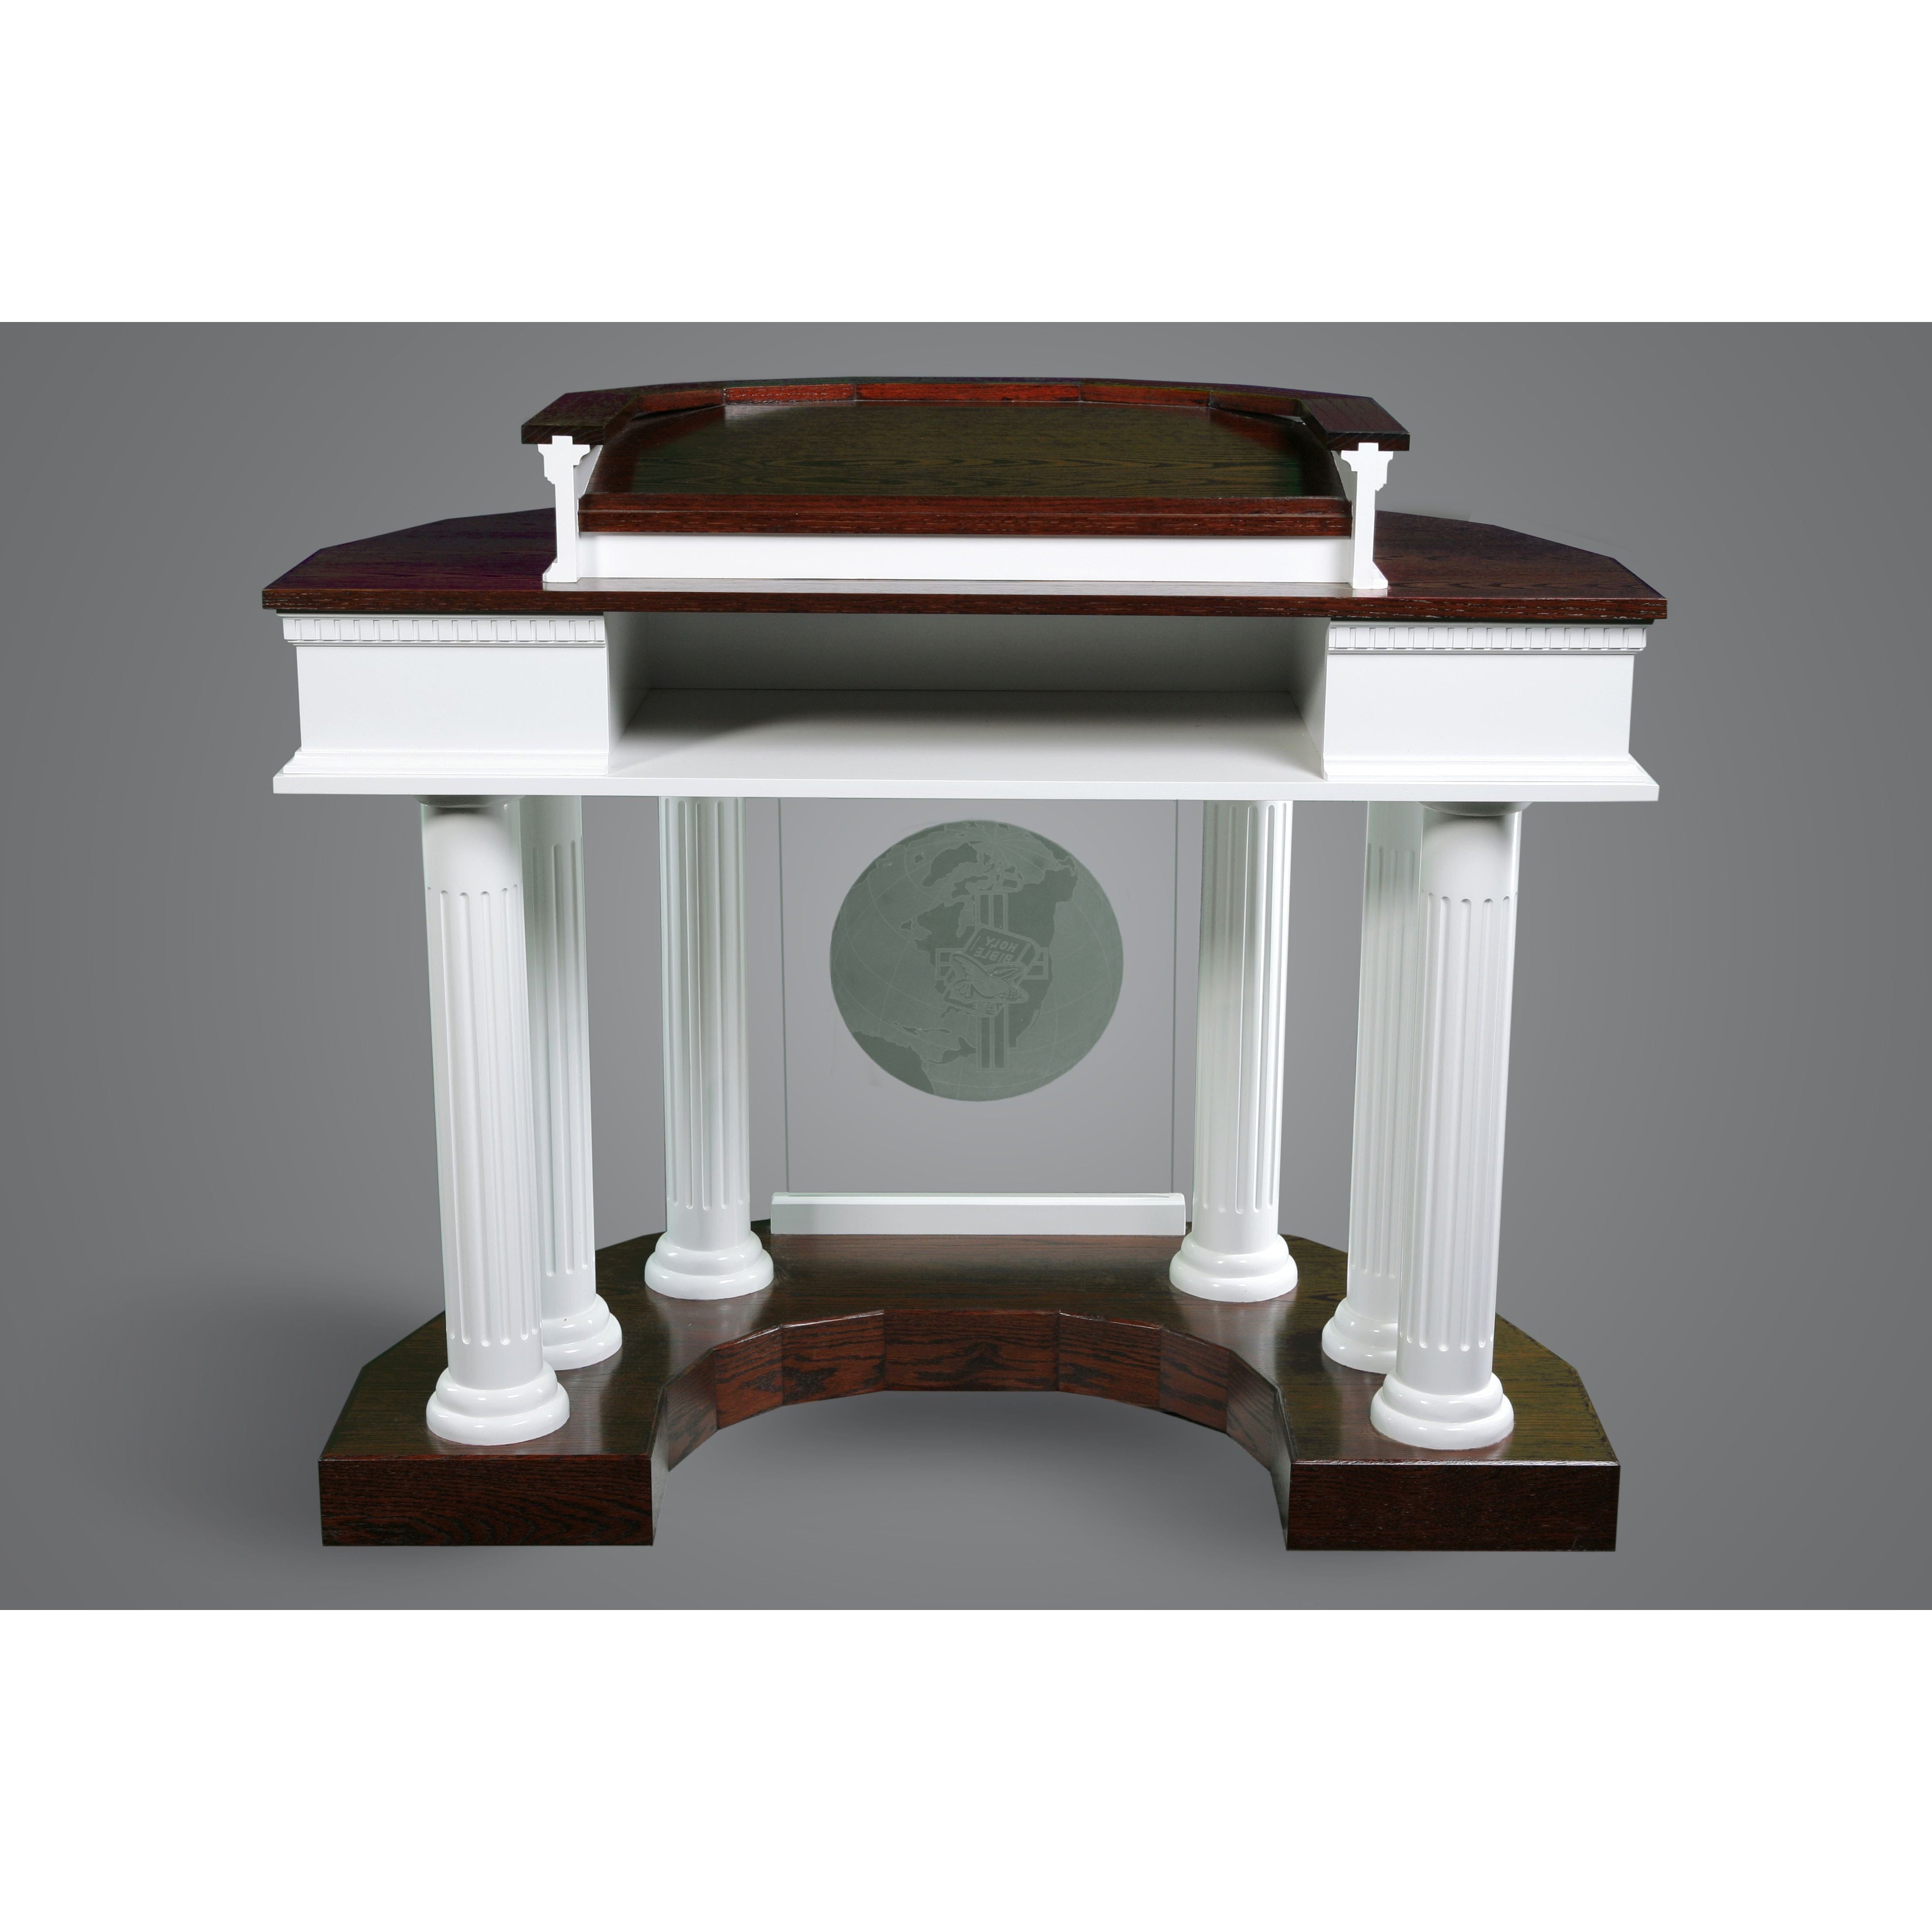 Modern Church Pulpit - church podium with glass, wooden church podium with wheels